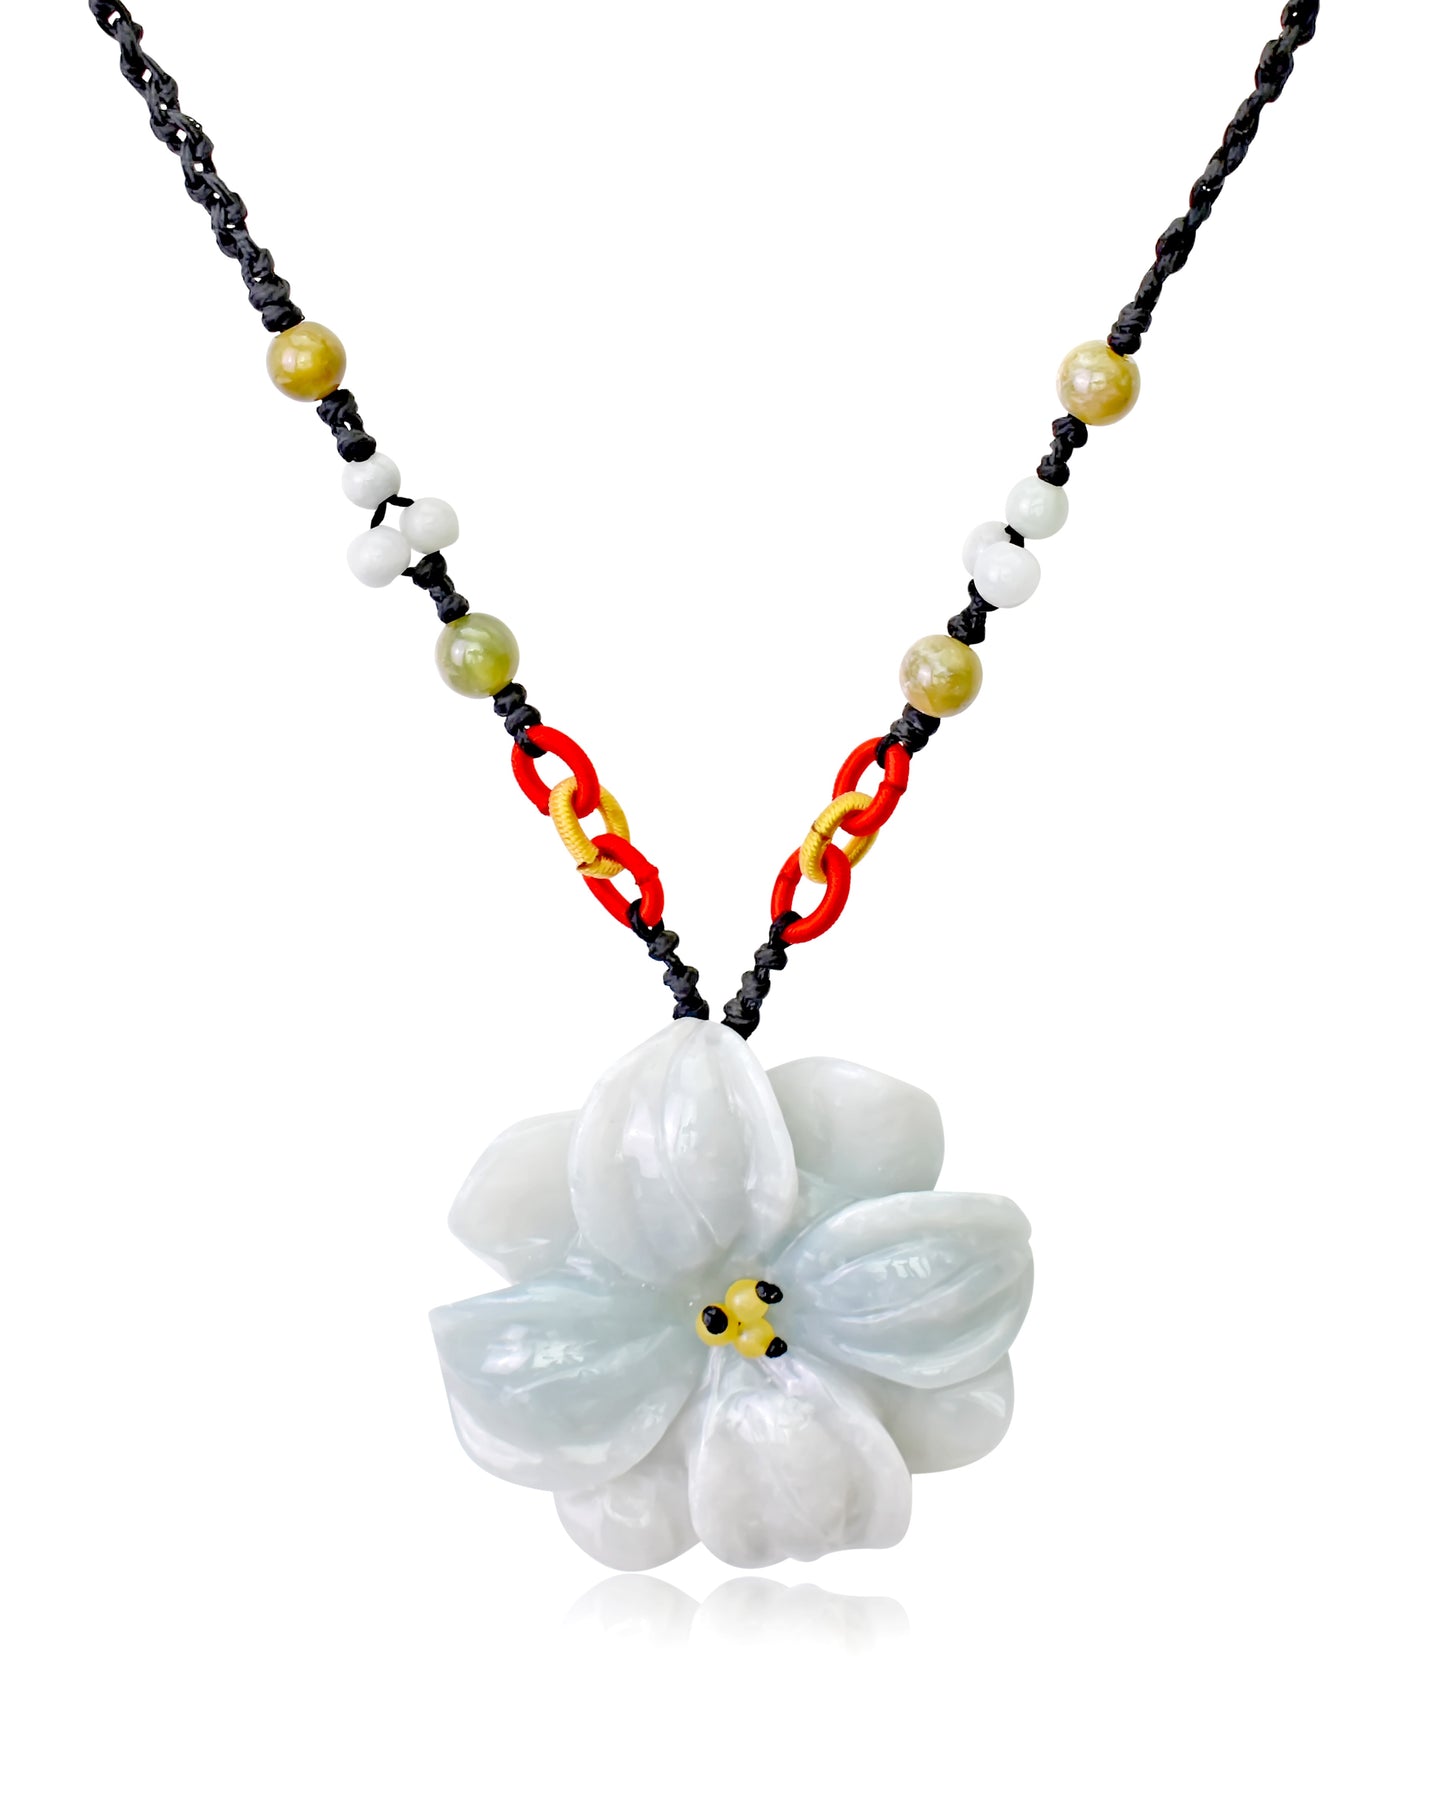 Stand Out and Shine with a Unique Dogwood Flower Jade Pendant made with Black Cord